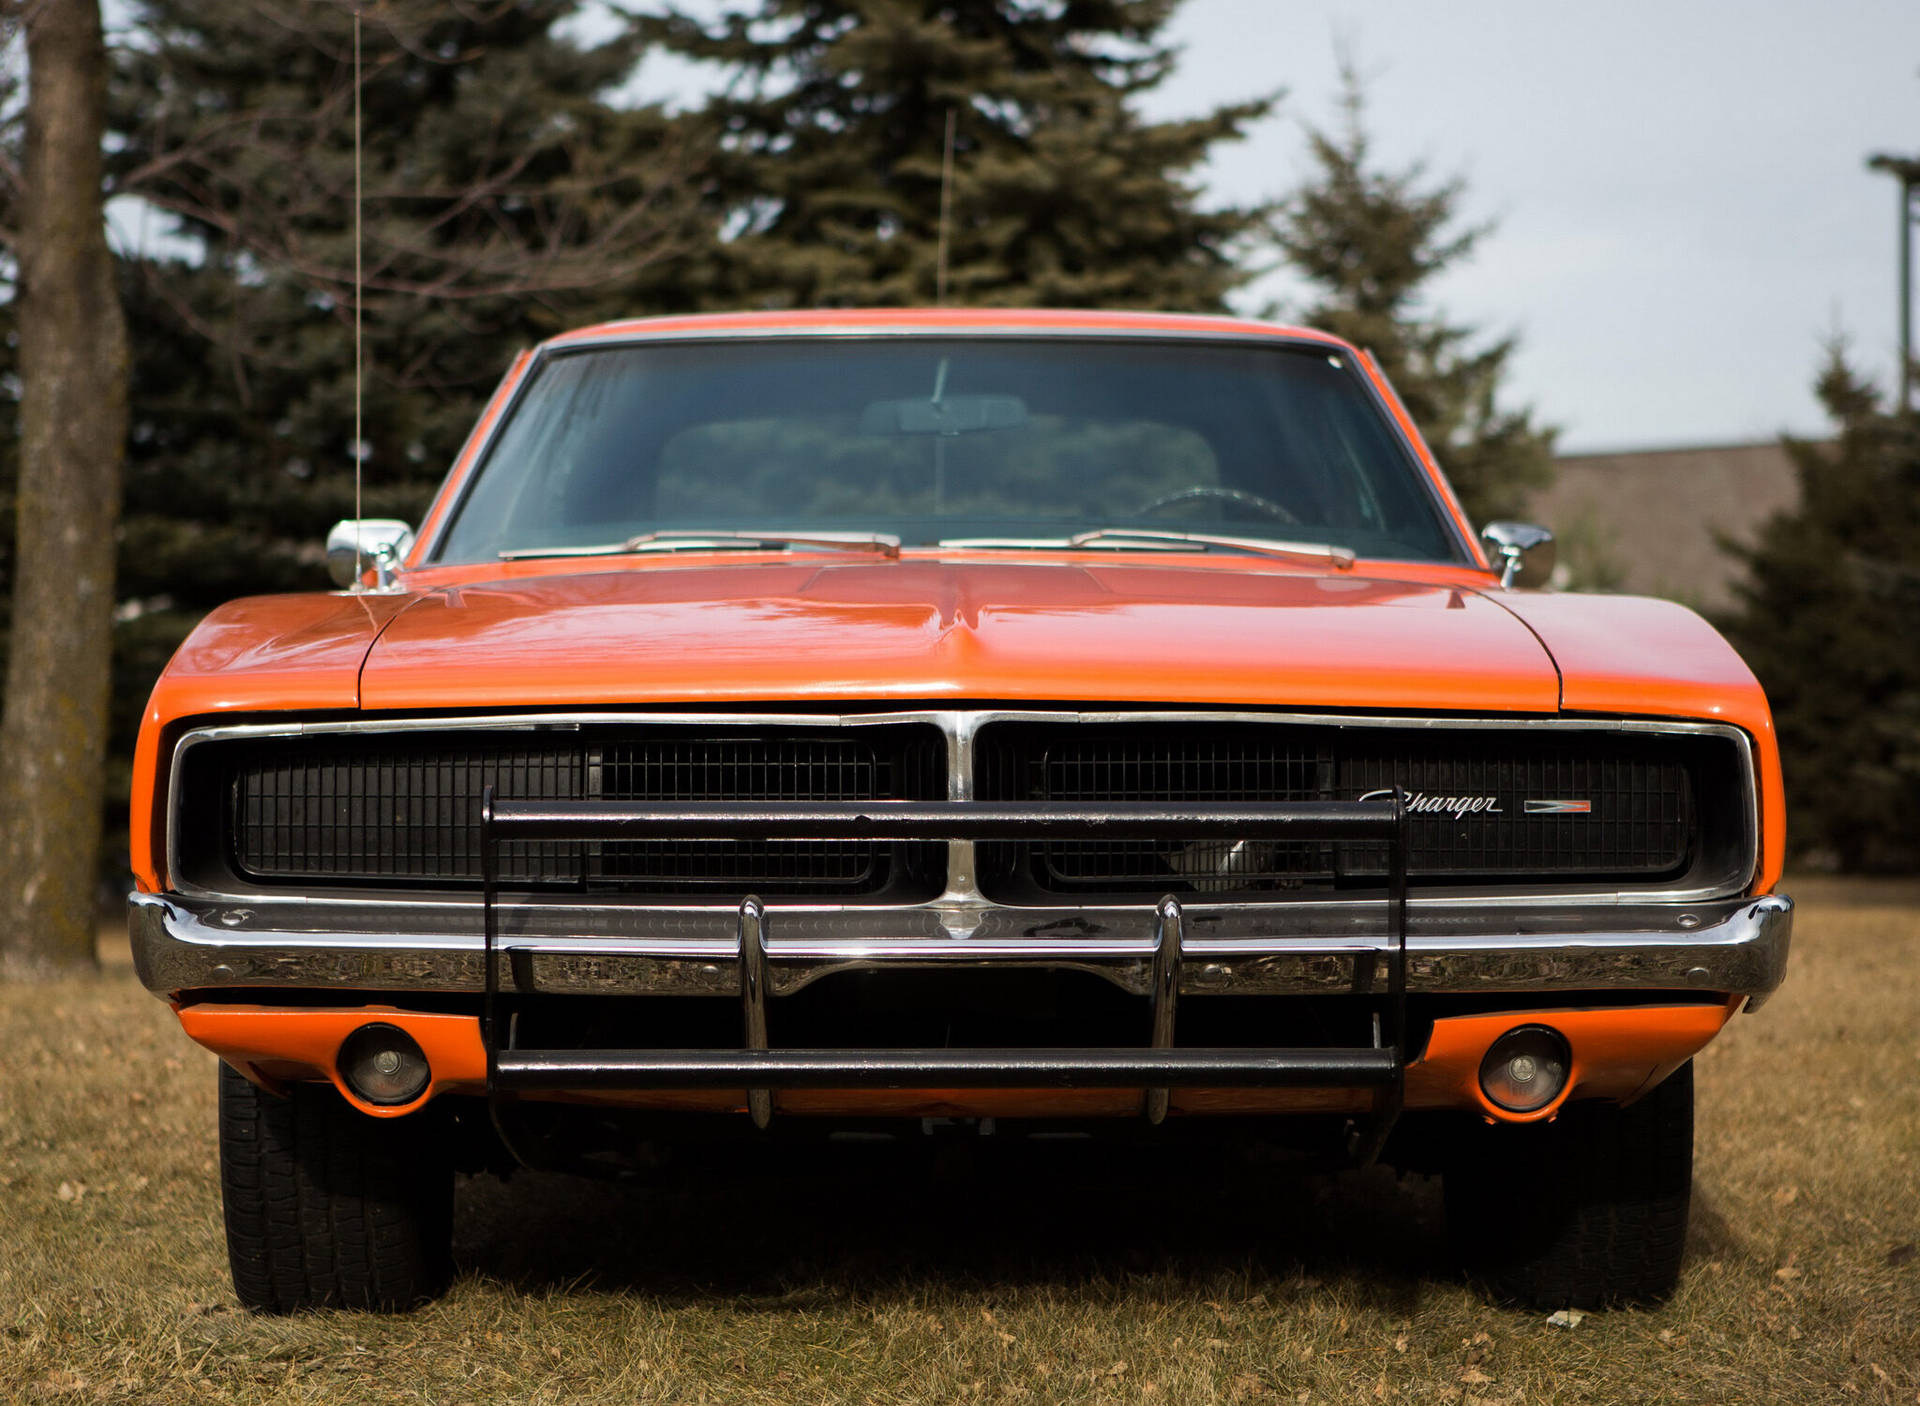 Front View Of The General Lee Car Wallpaper